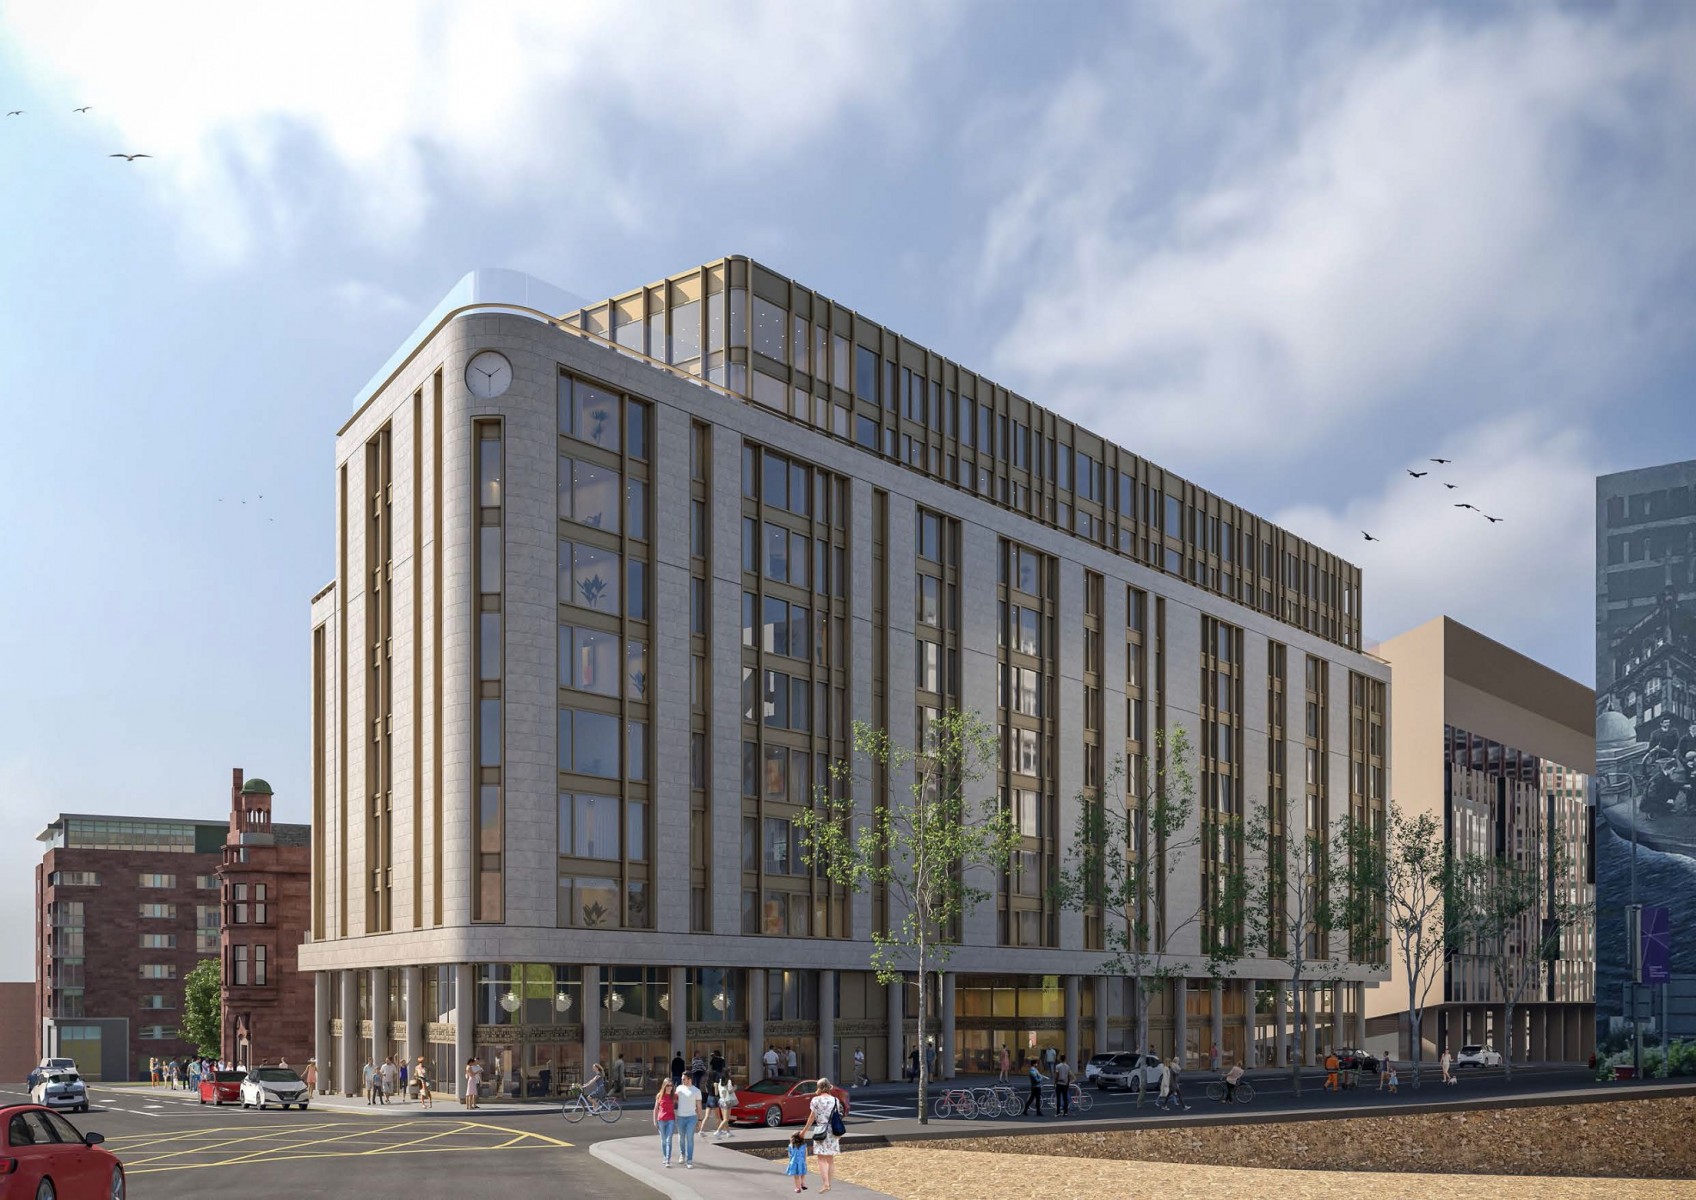 Plans for 239 flats in Glasgow city centre submitted